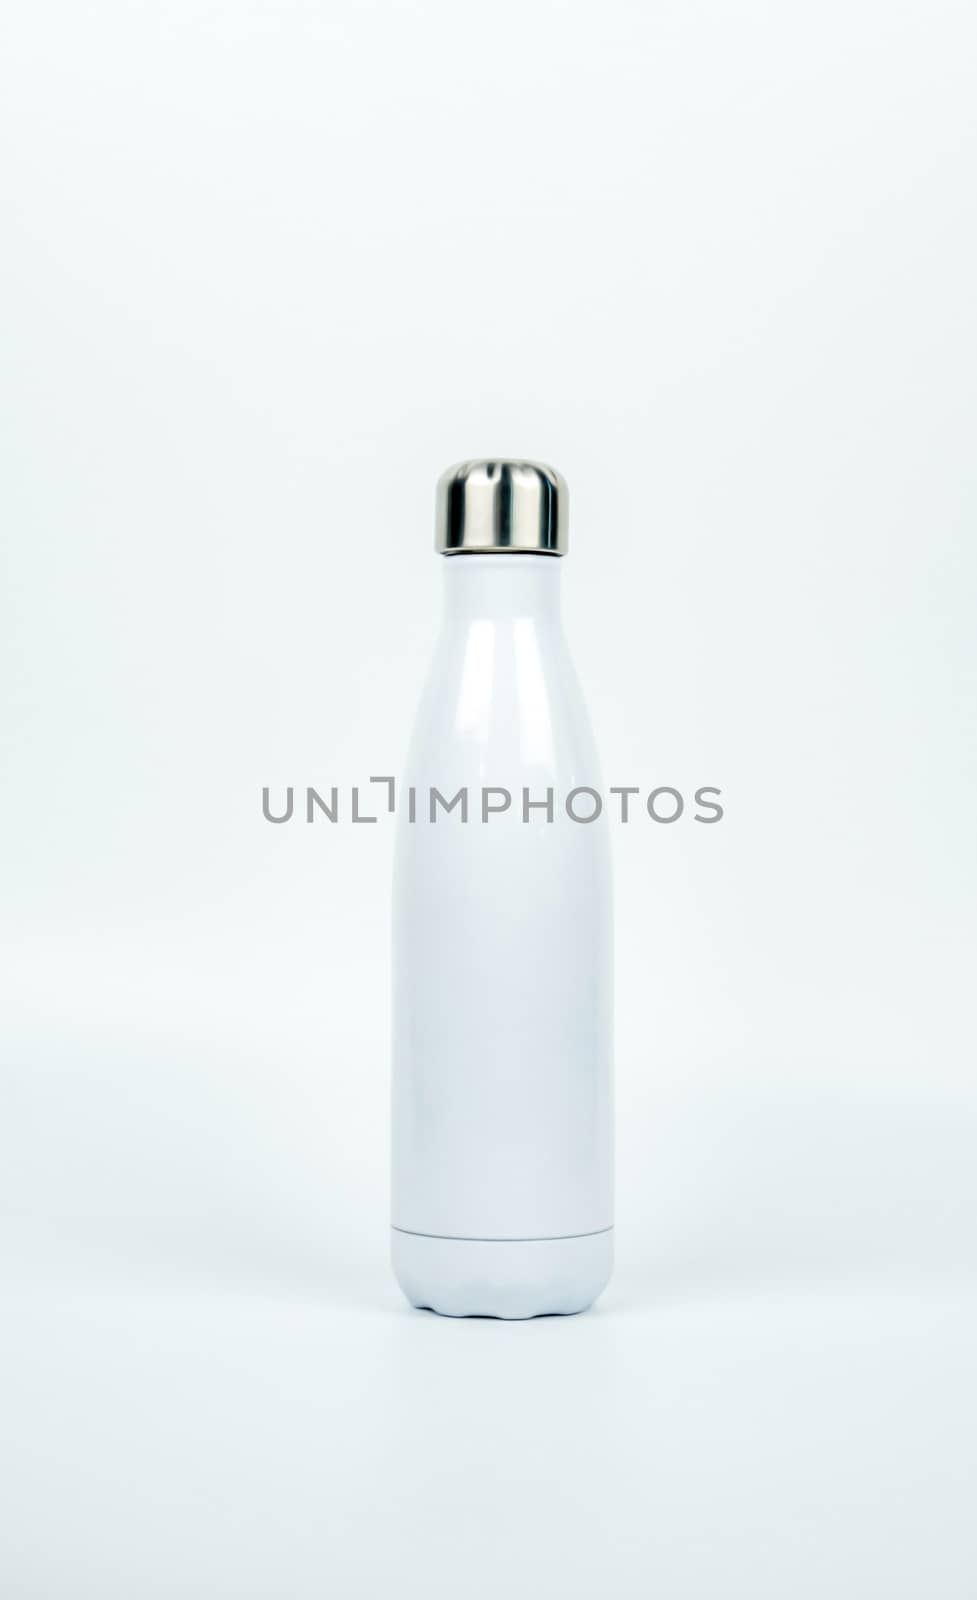 White thermos bottle with sport design on white background with copy space. Beverage container. Coffee and tea bottle. by Fahroni